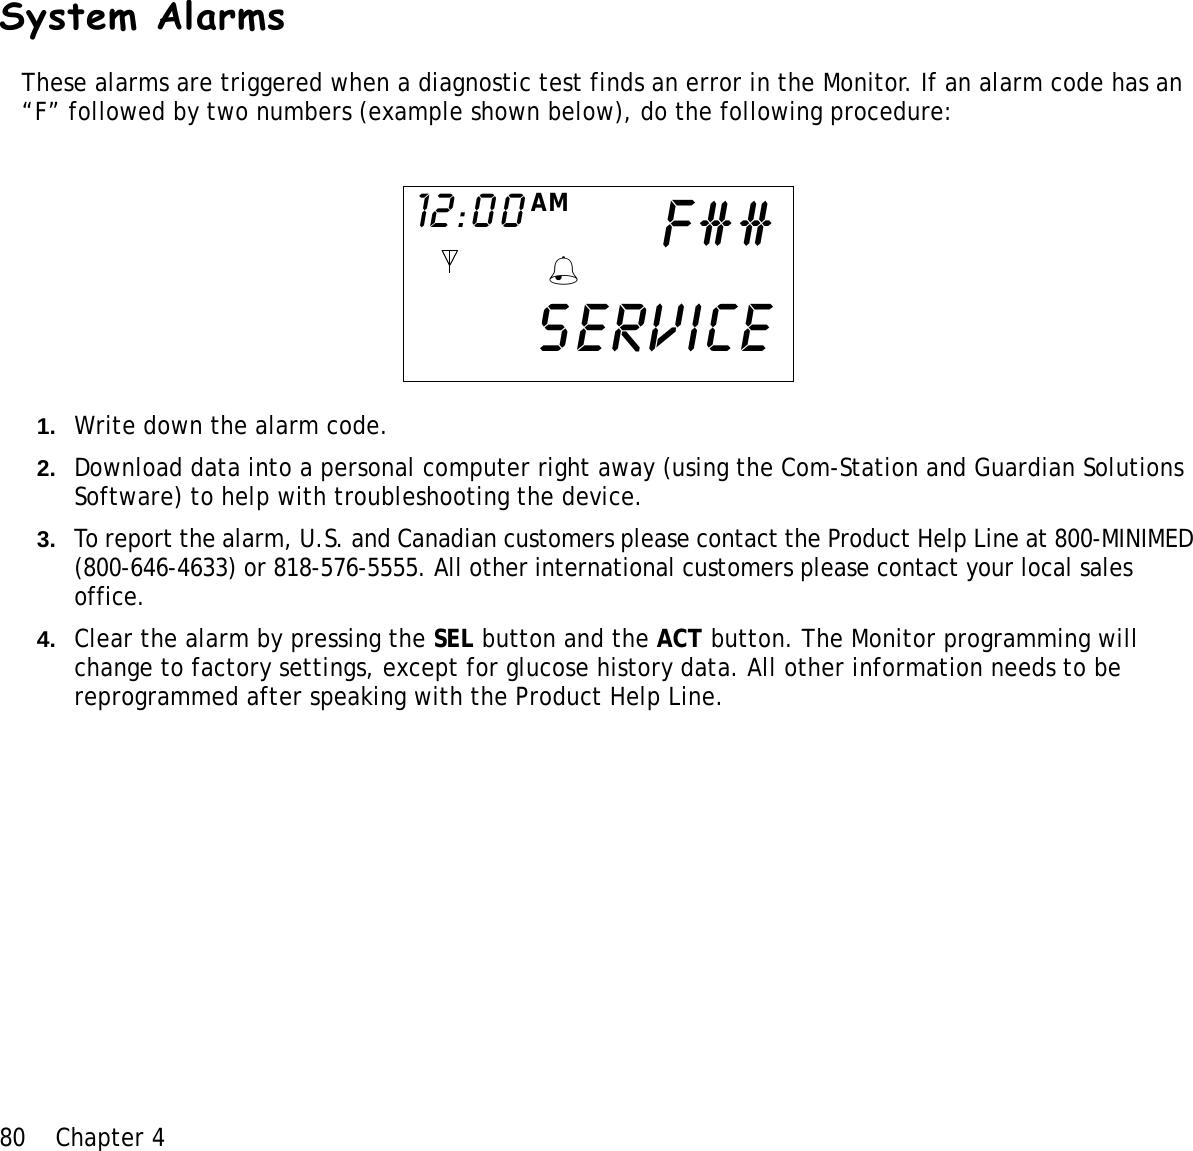 80 Chapter 4 System AlarmsThese alarms are triggered when a diagnostic test finds an error in the Monitor. If an alarm code has an “F” followed by two numbers (example shown below), do the following procedure:1. Write down the alarm code. 2. Download data into a personal computer right away (using the Com-Station and Guardian Solutions Software) to help with troubleshooting the device. 3. To report the alarm, U.S. and Canadian customers please contact the Product Help Line at 800-MINIMED (800-646-4633) or 818-576-5555. All other international customers please contact your local sales office.4. Clear the alarm by pressing the SEL button and the ACT button. The Monitor programming will change to factory settings, except for glucose history data. All other information needs to be reprogrammed after speaking with the Product Help Line. Service12:00 AMF##